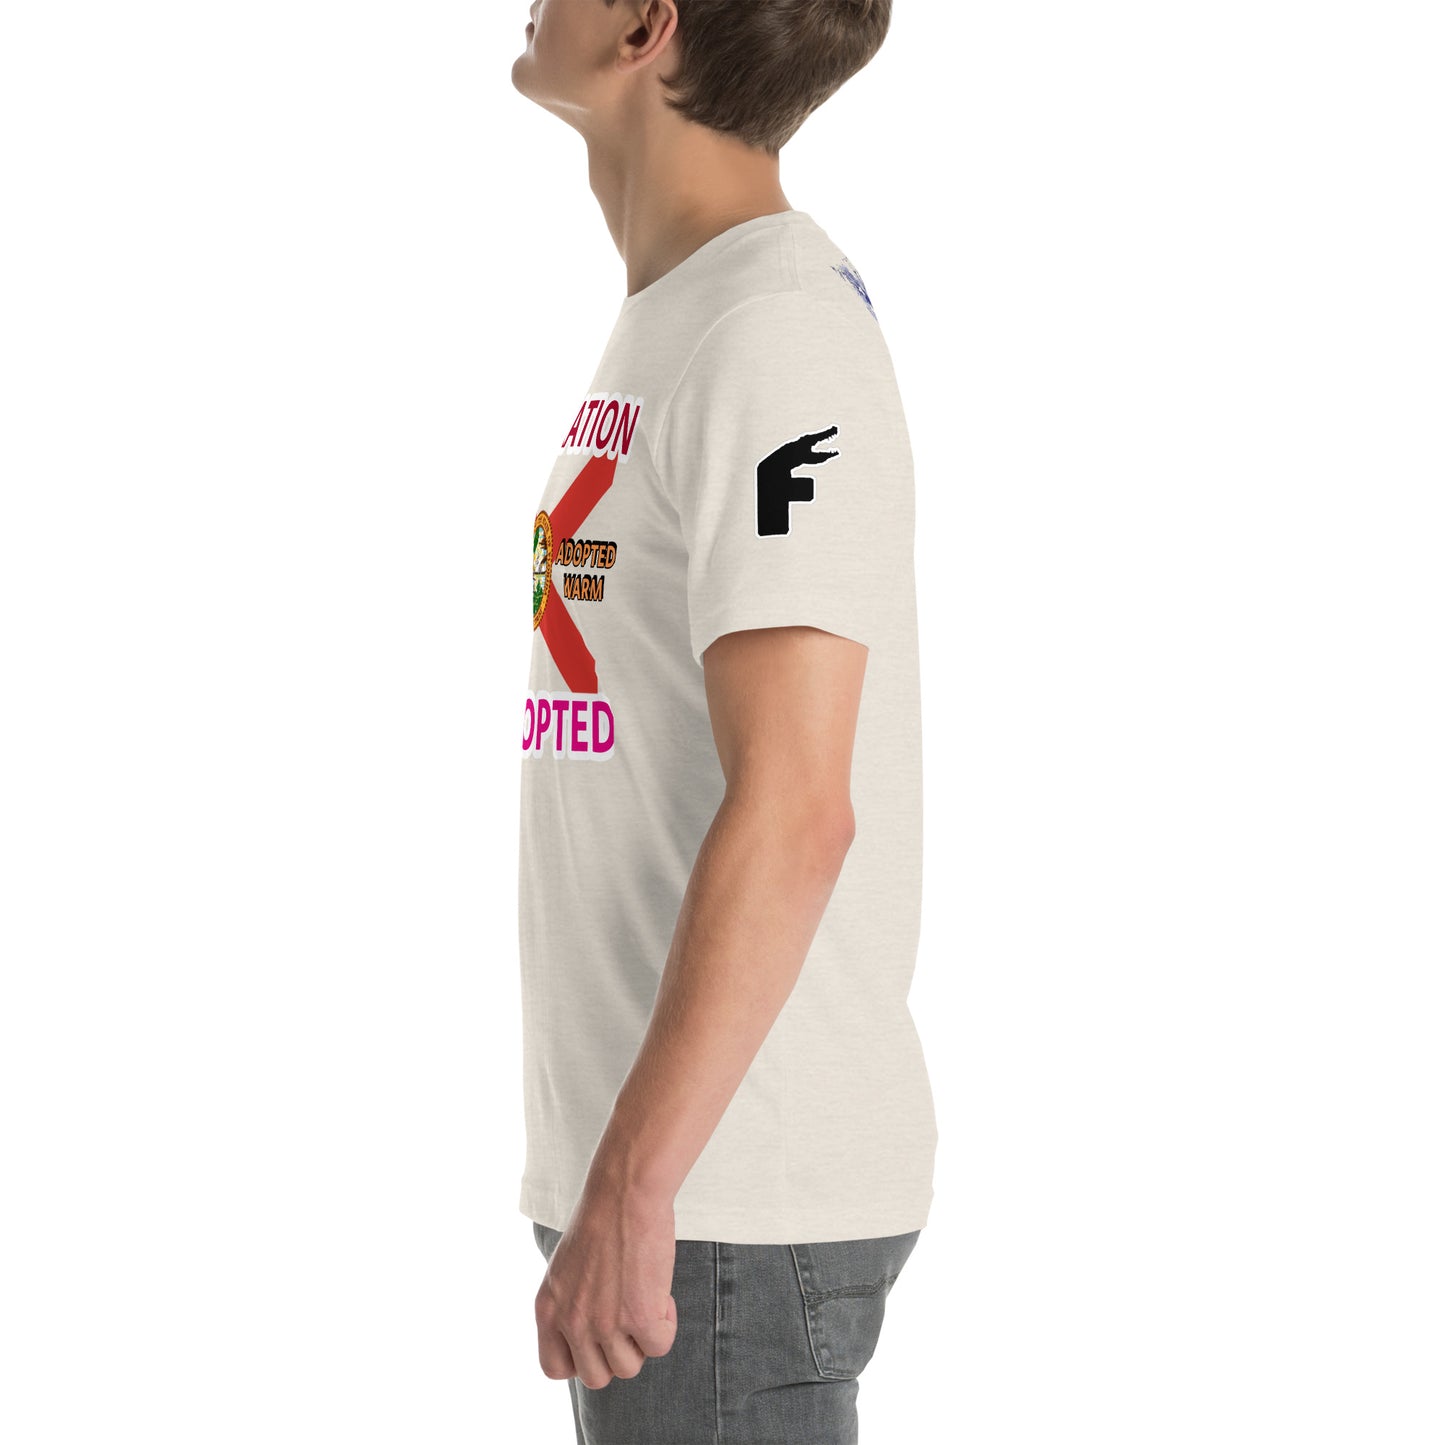 GENX FLadopted Unisex t-shirt